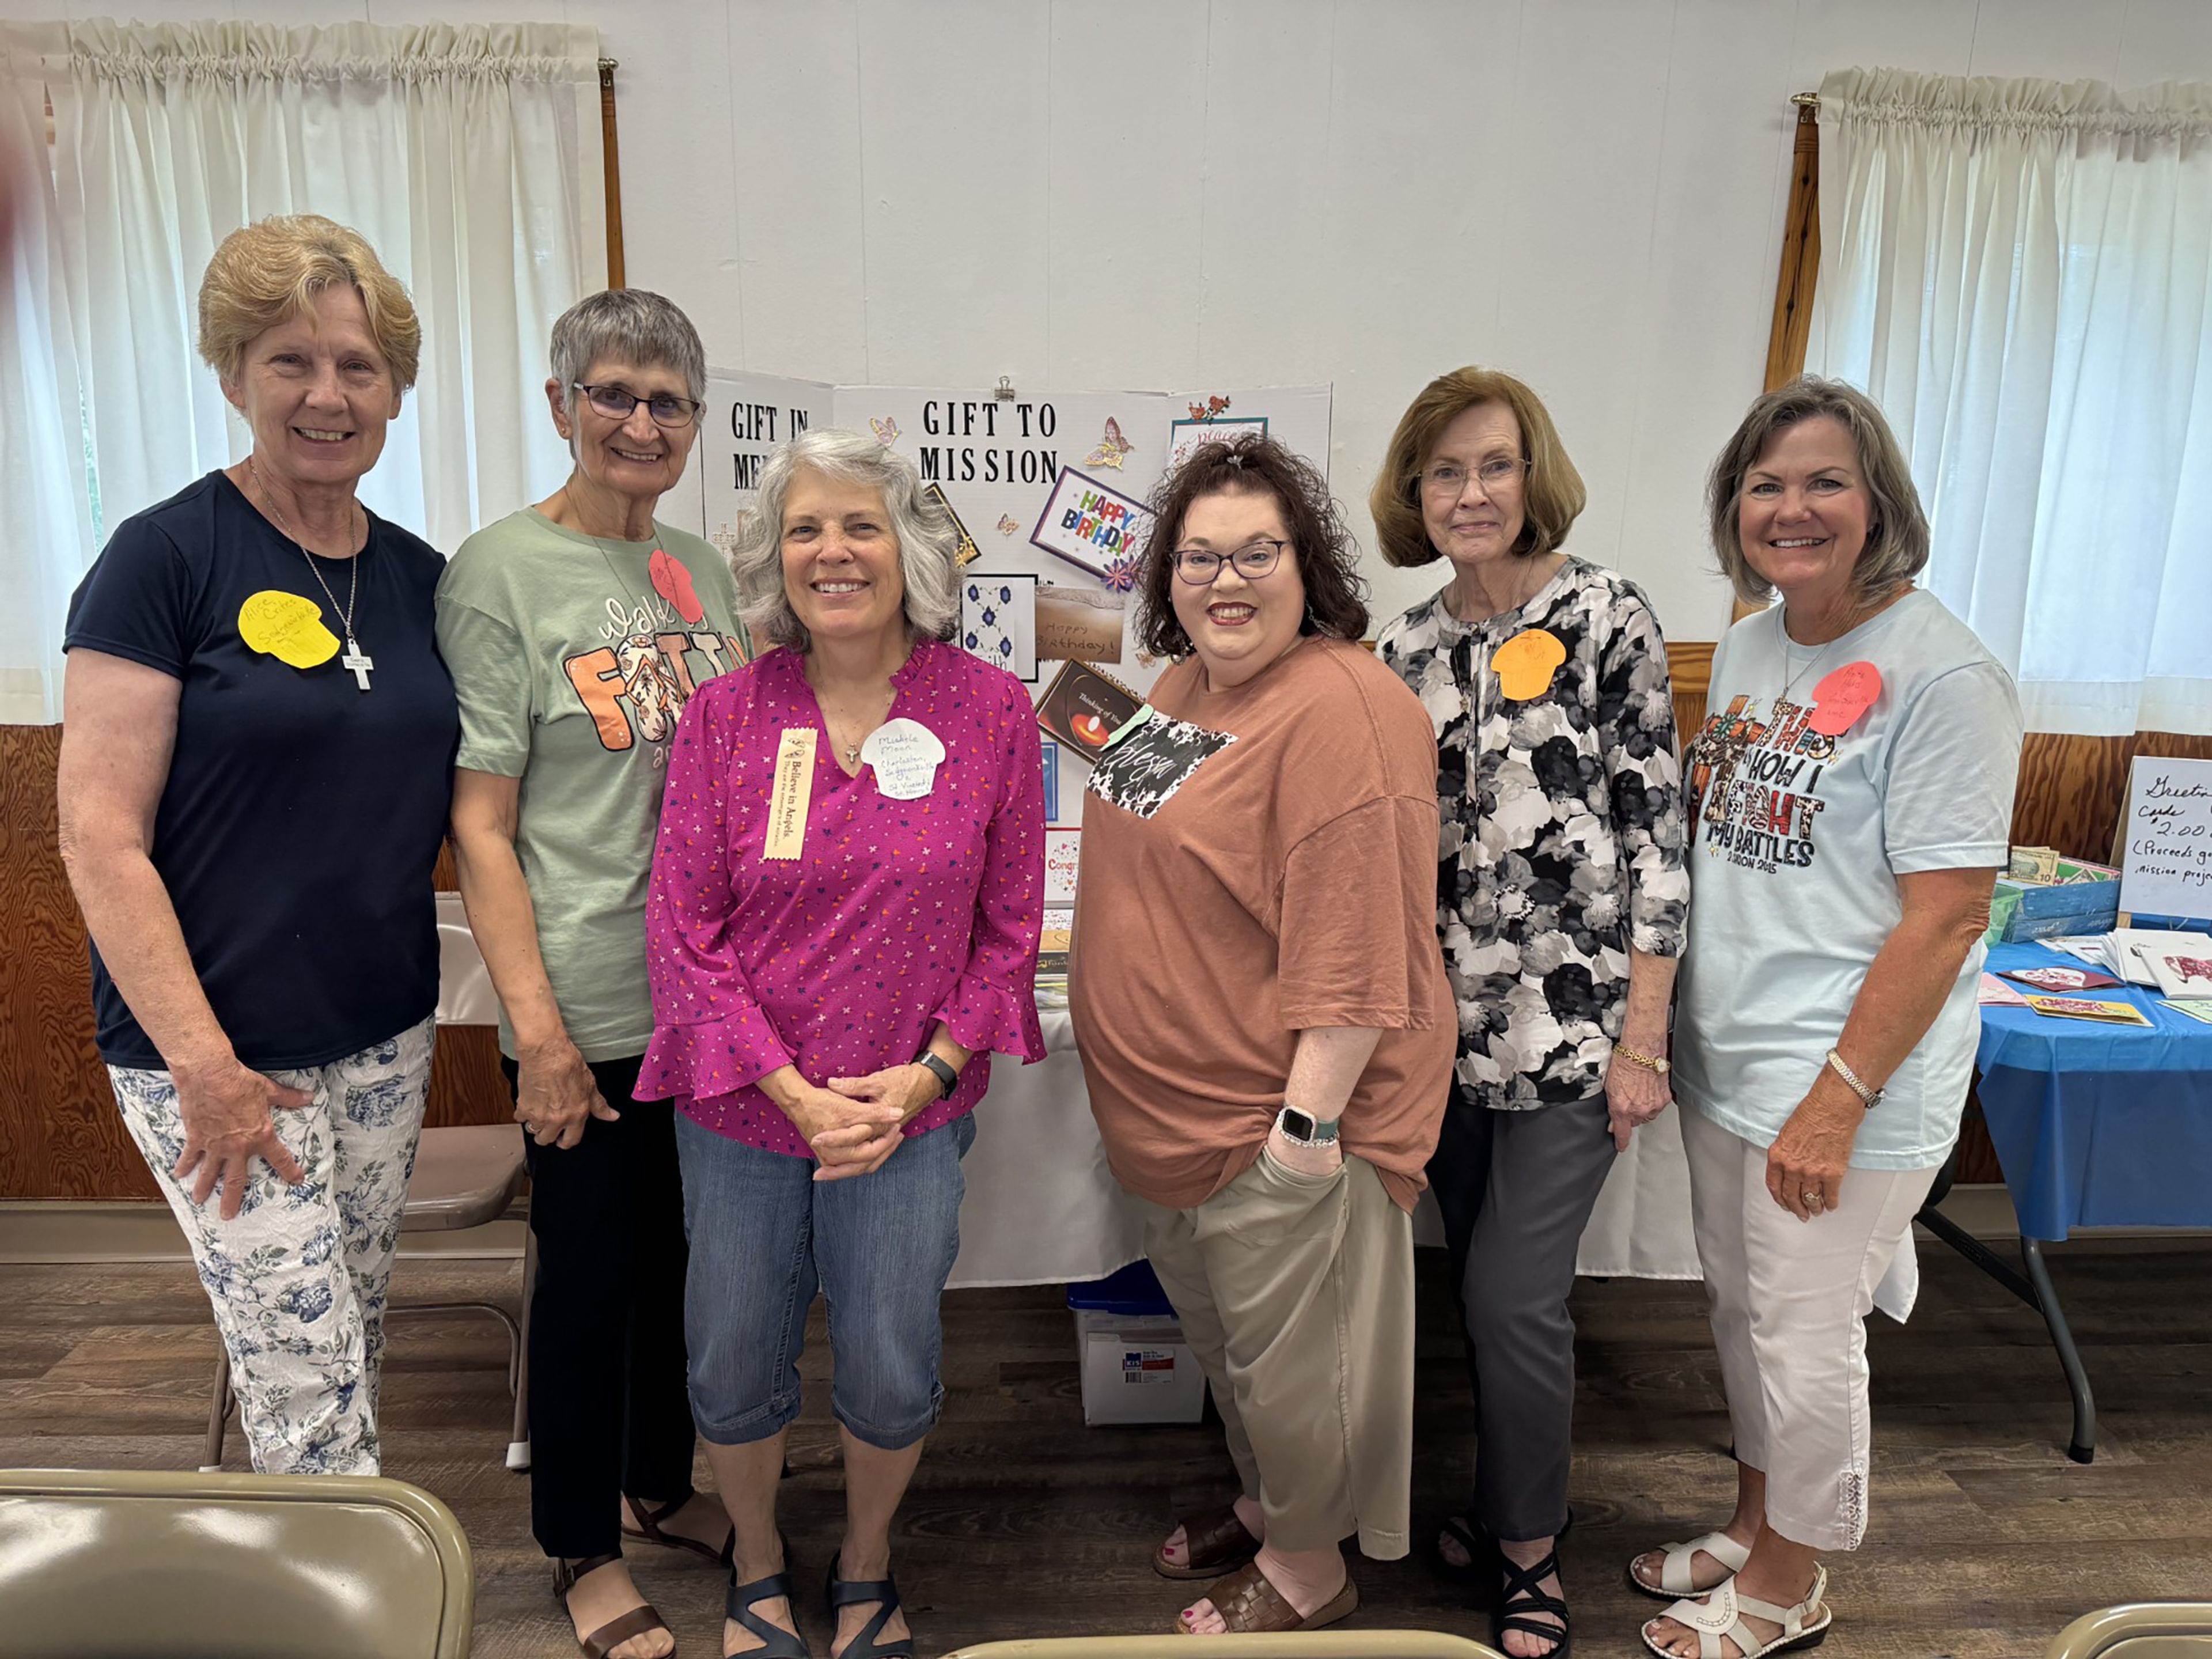 Sedgewickville UWF members attending the Retreat were (from left) Alice Crites, Pete Shrum, Michele Moon, Mandy Niswonger and Kay Yount Anita Hahs.
